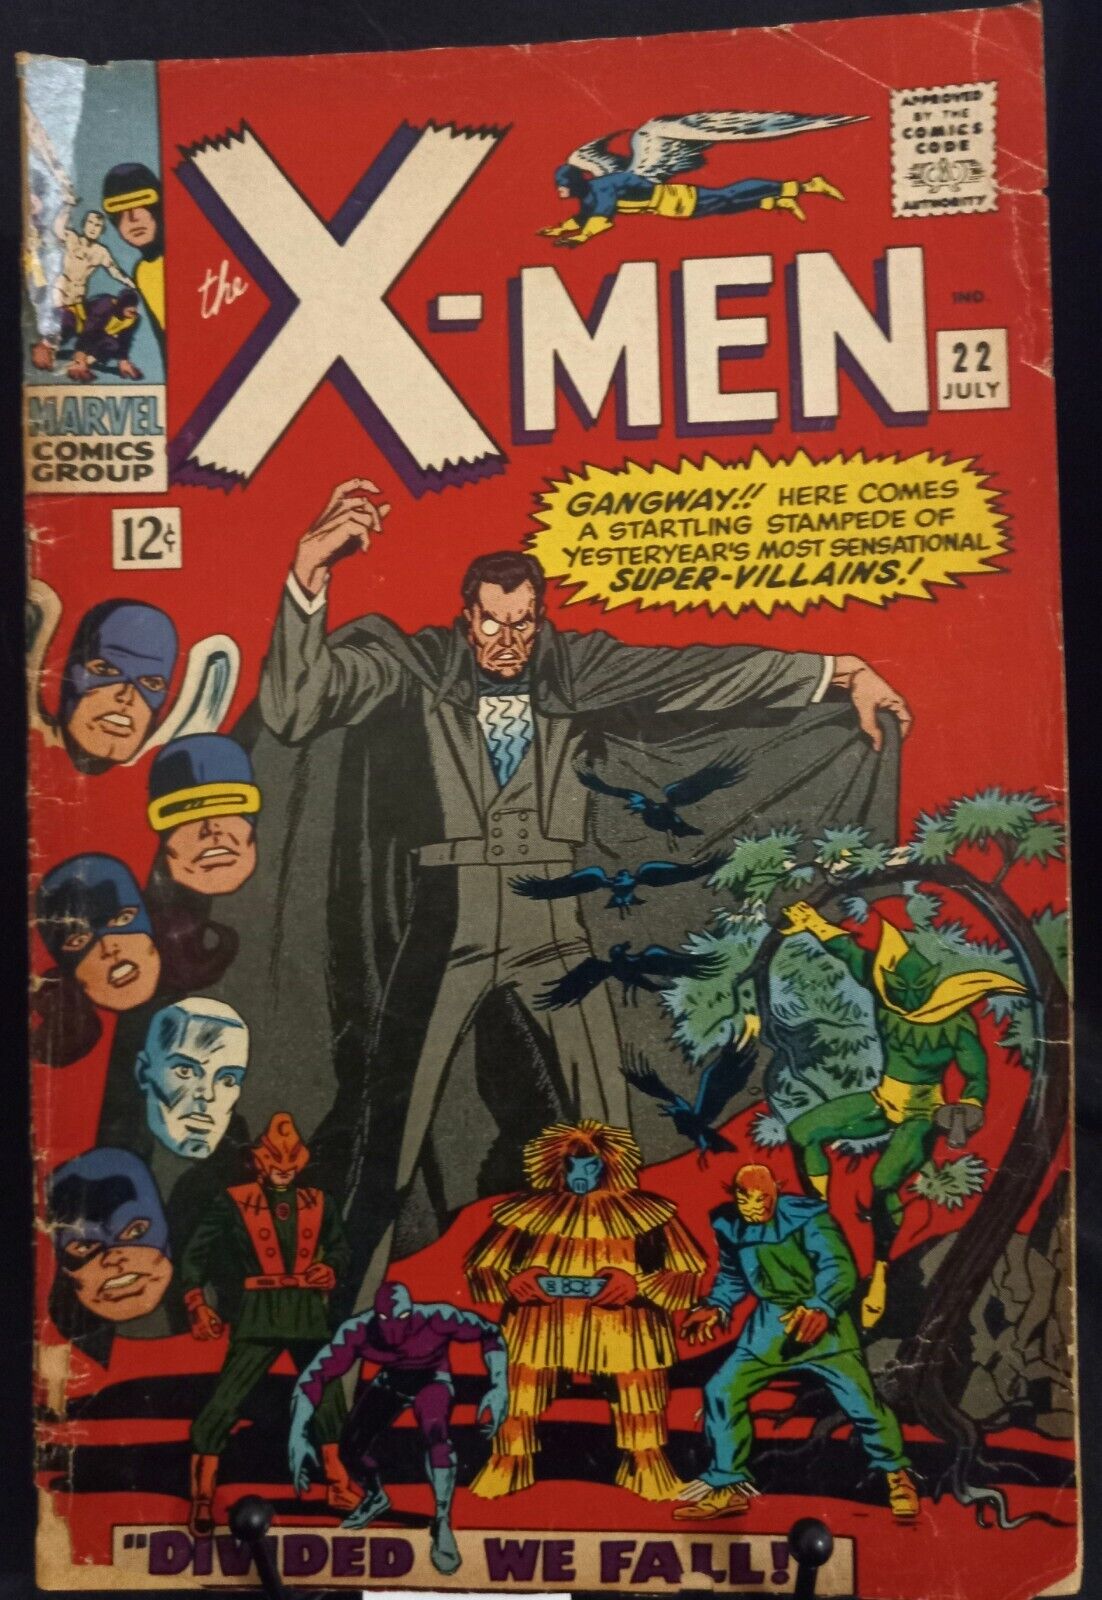 the X-Men #22 '66 Marvel 'Divided We Fall'